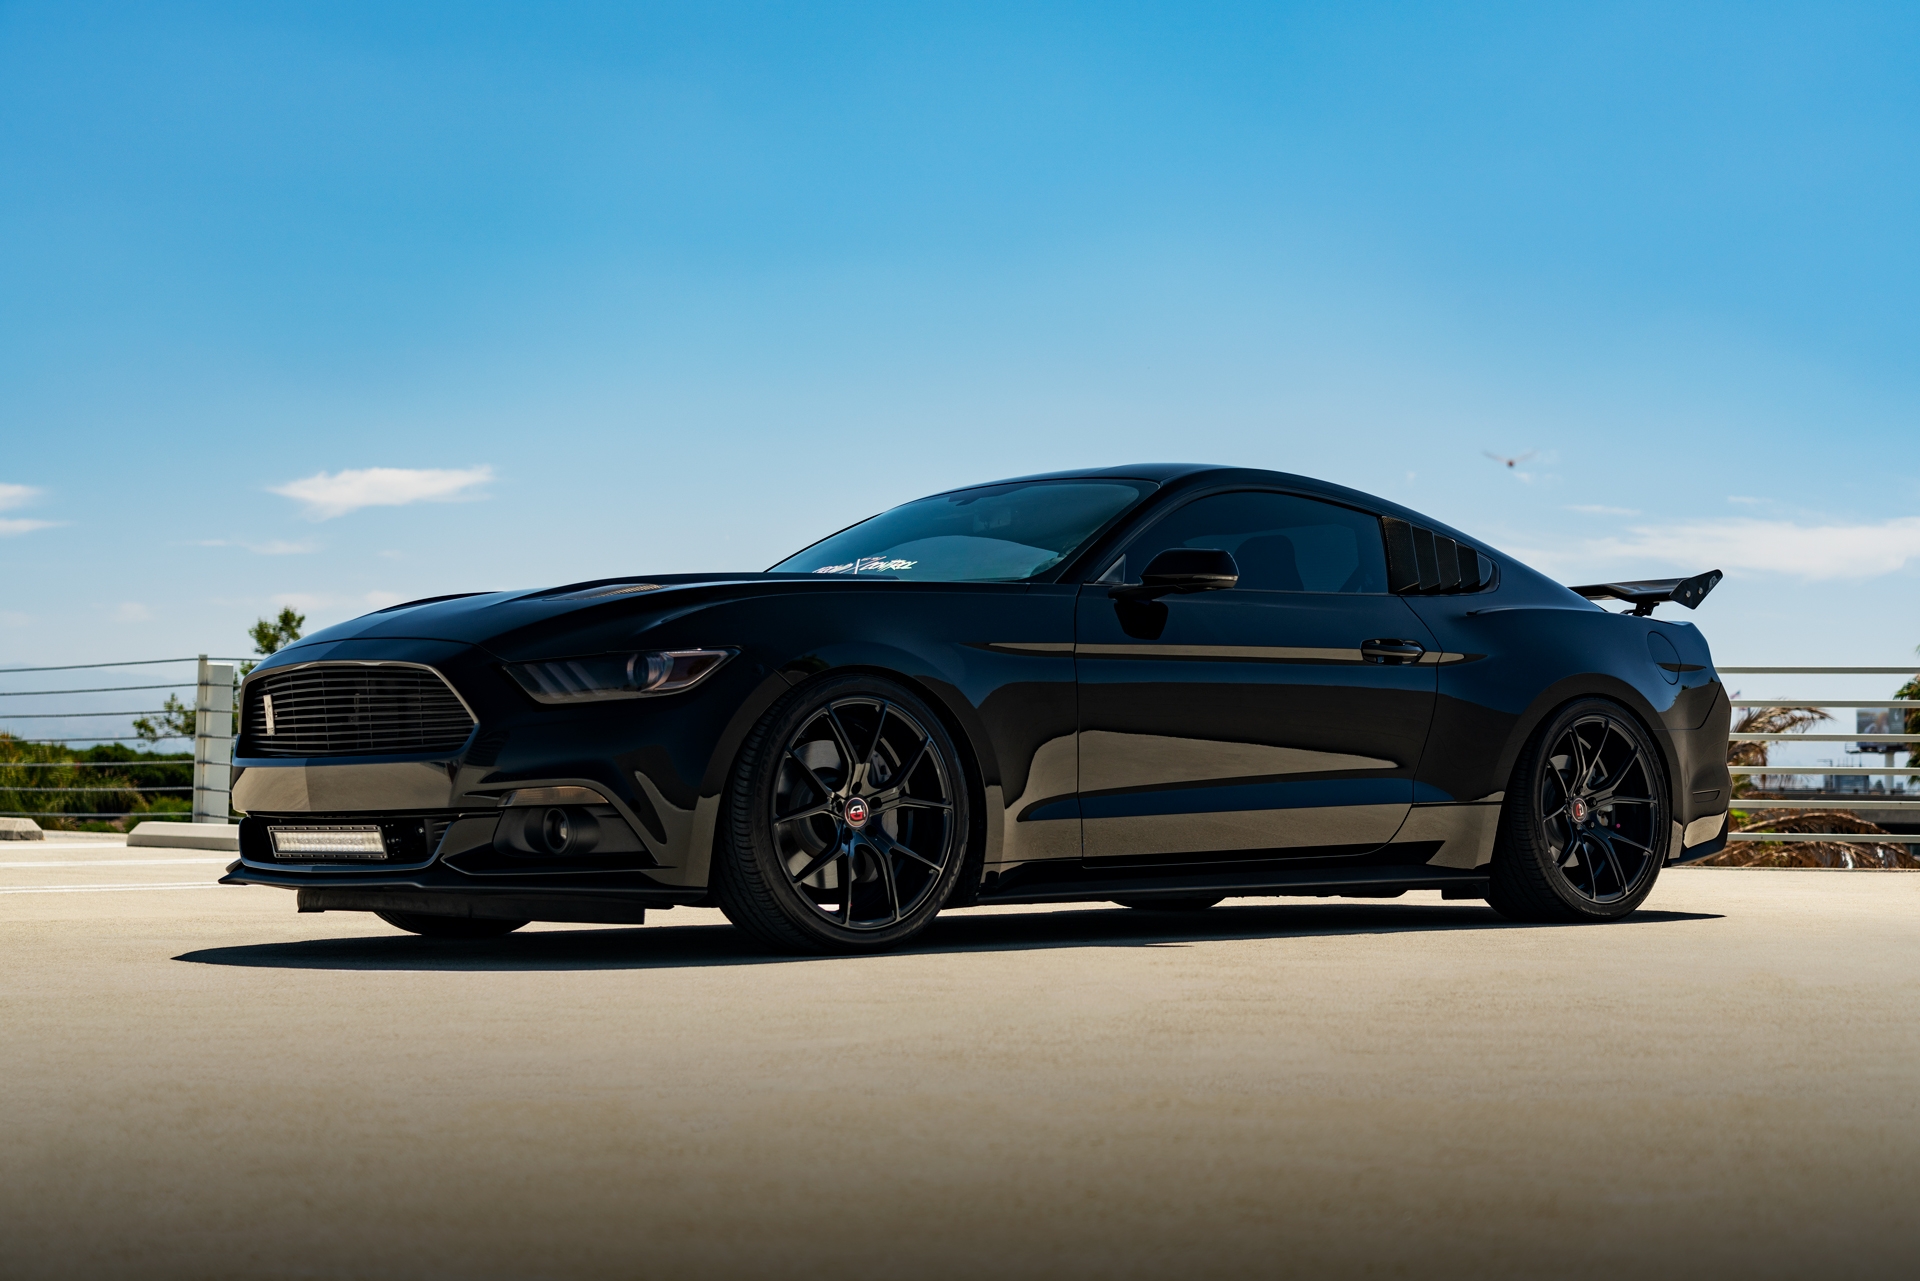 Curva Concepts C42 Aftermarket Wheels on a Blacked Out Ford Mustang GT